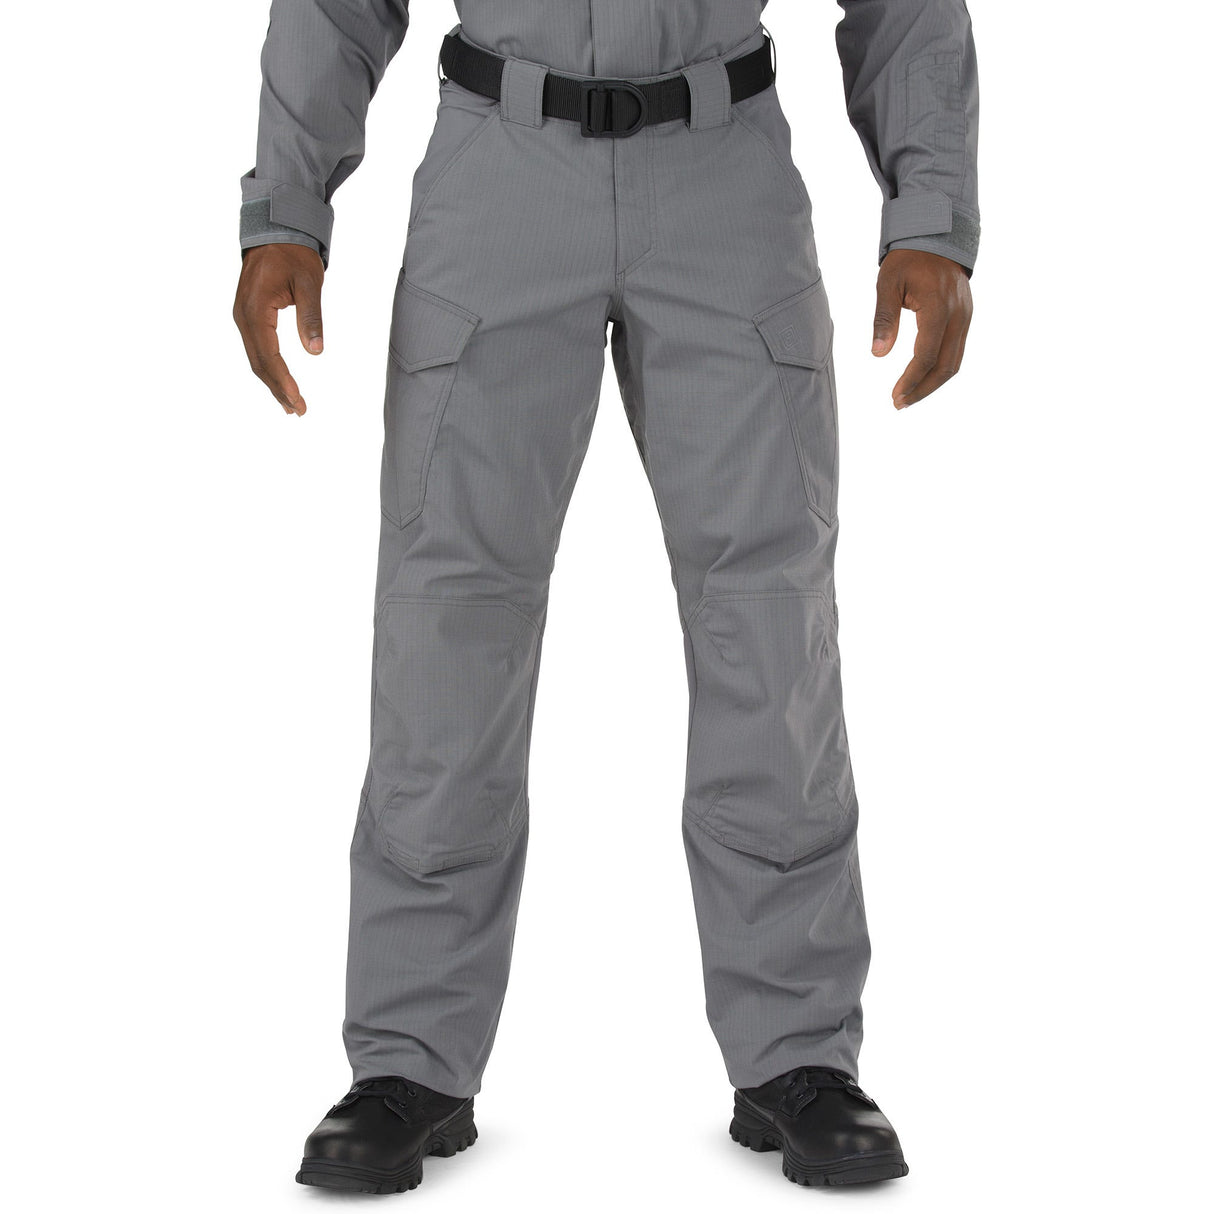 Enduro-Flex™ Properties Pant: Provides stretch and comfort during activities.